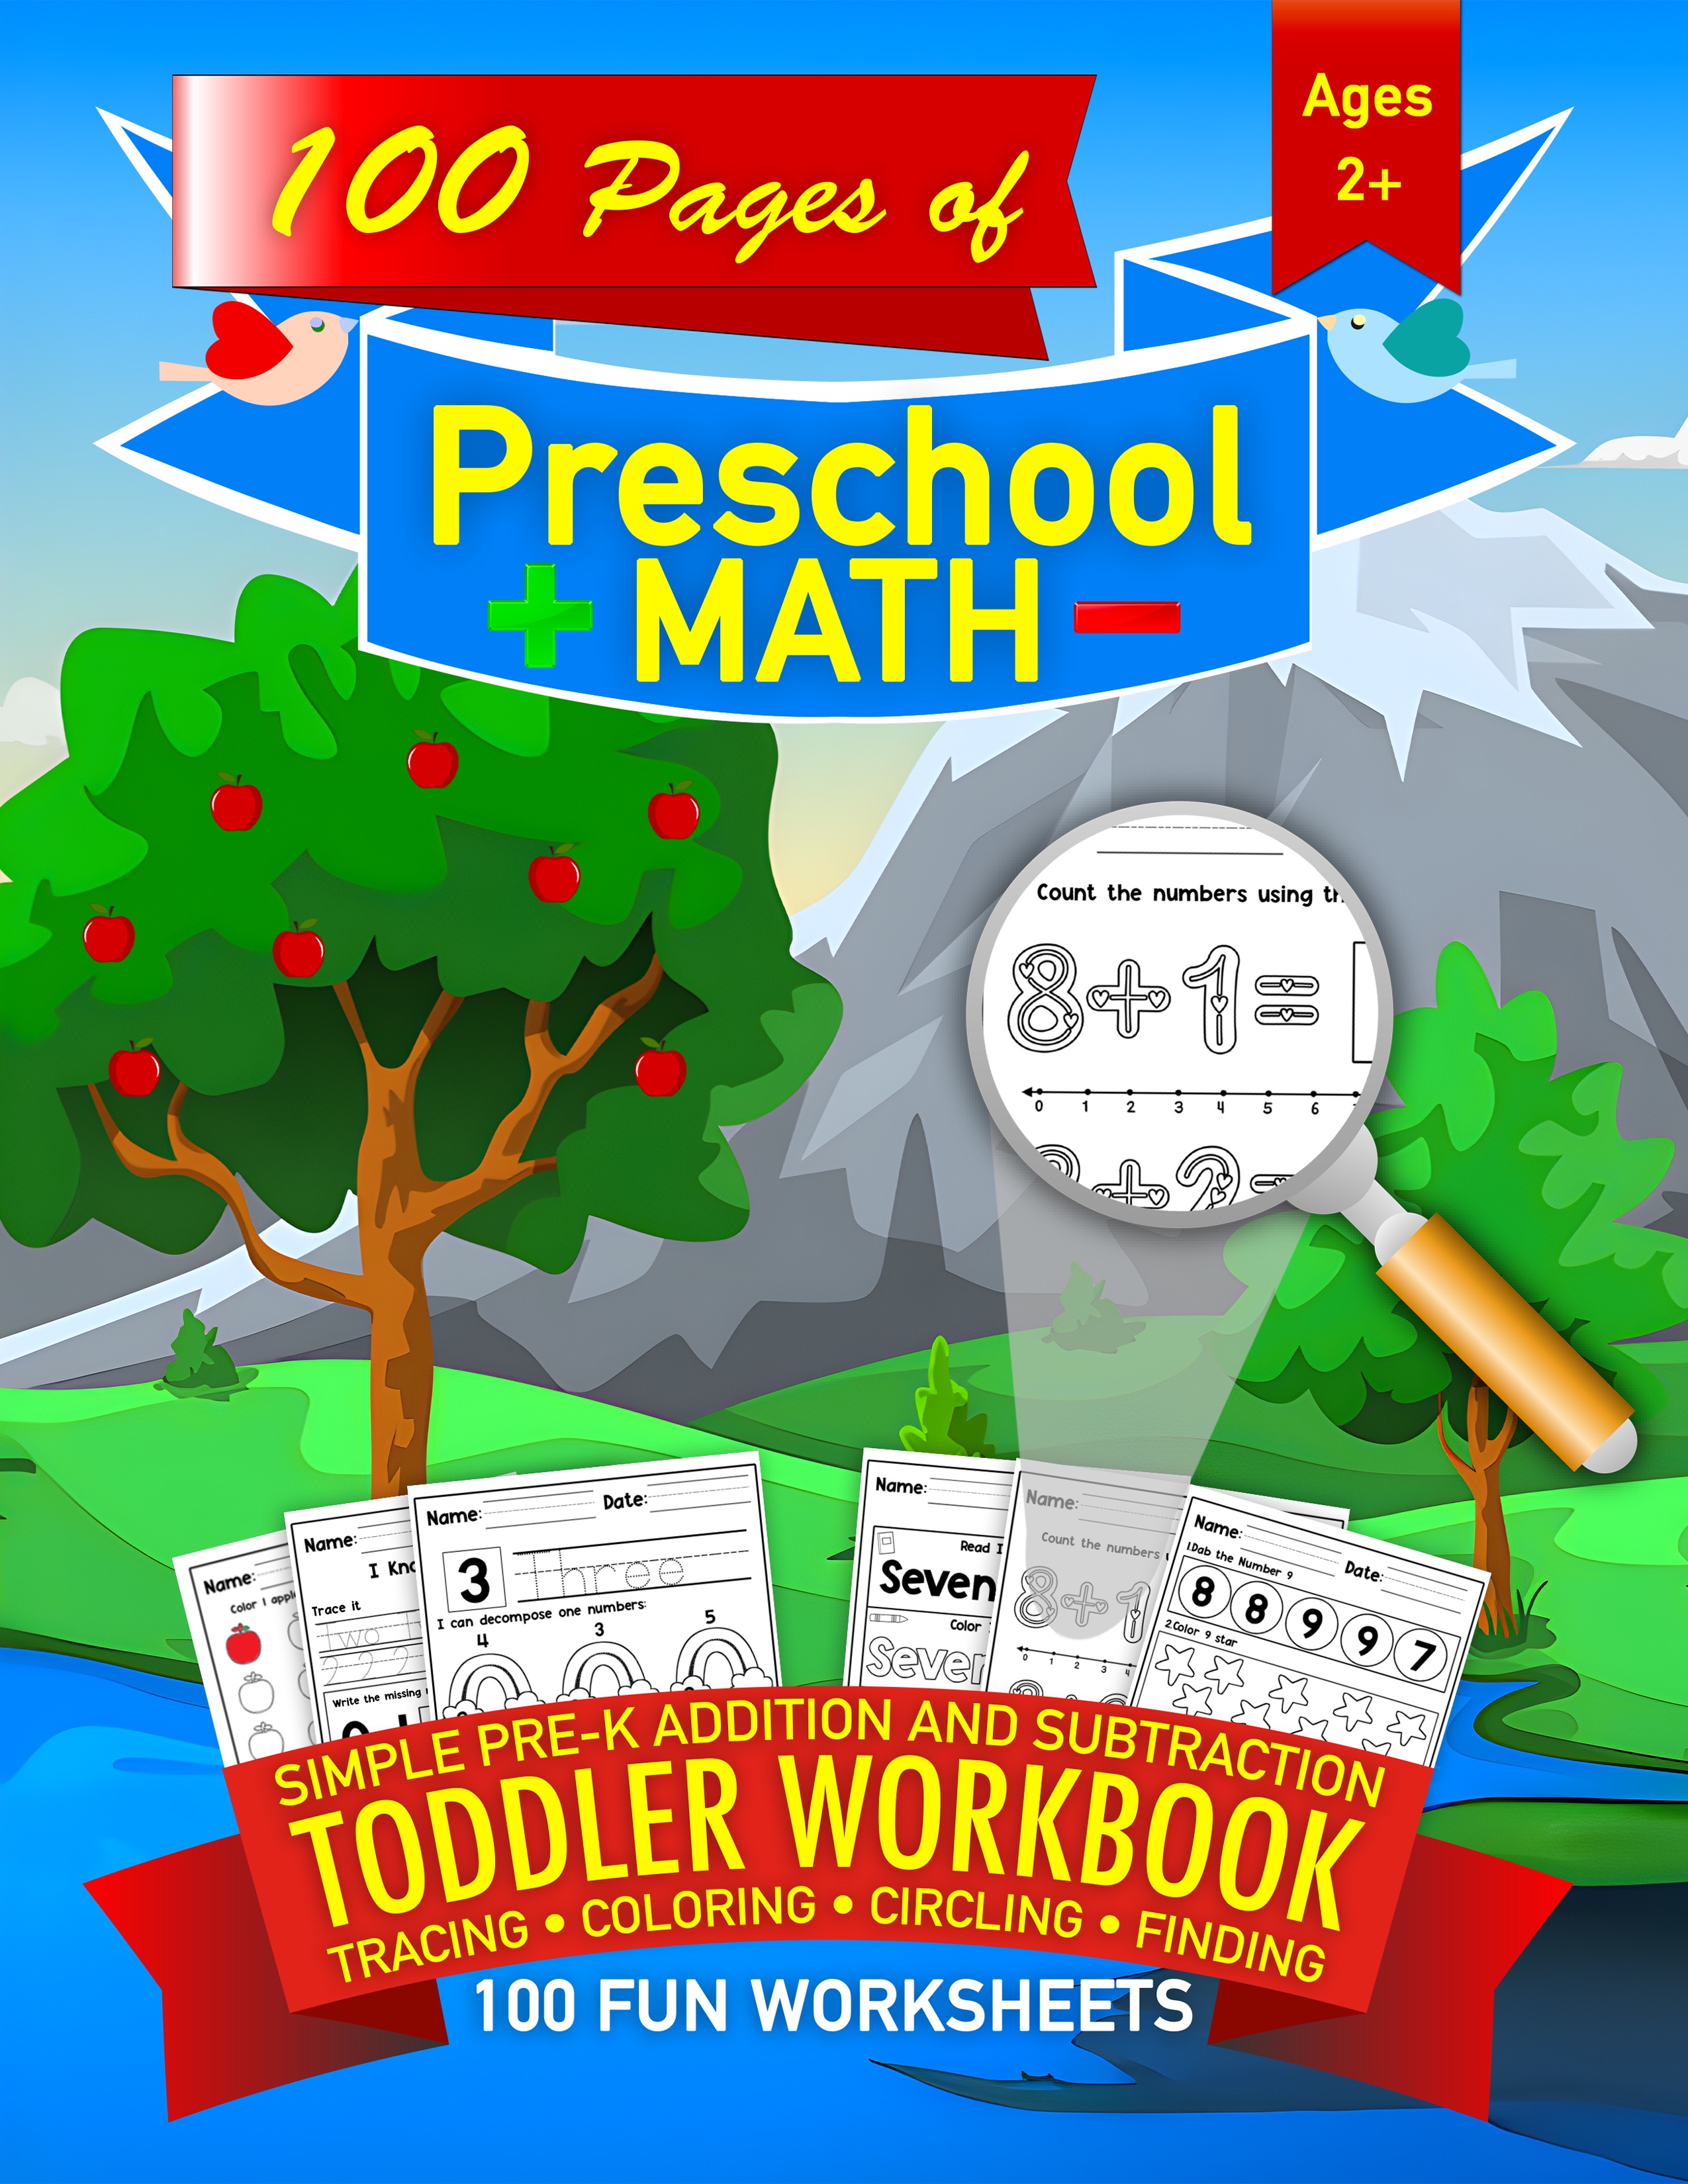 Preschool Math Workbook - Simple Toddler Pre-K Addition and Subtraction: 100 Beginner Math Learning Worksheets with Number Coloring and Tracing Prep Toddler Preschool Workbooks